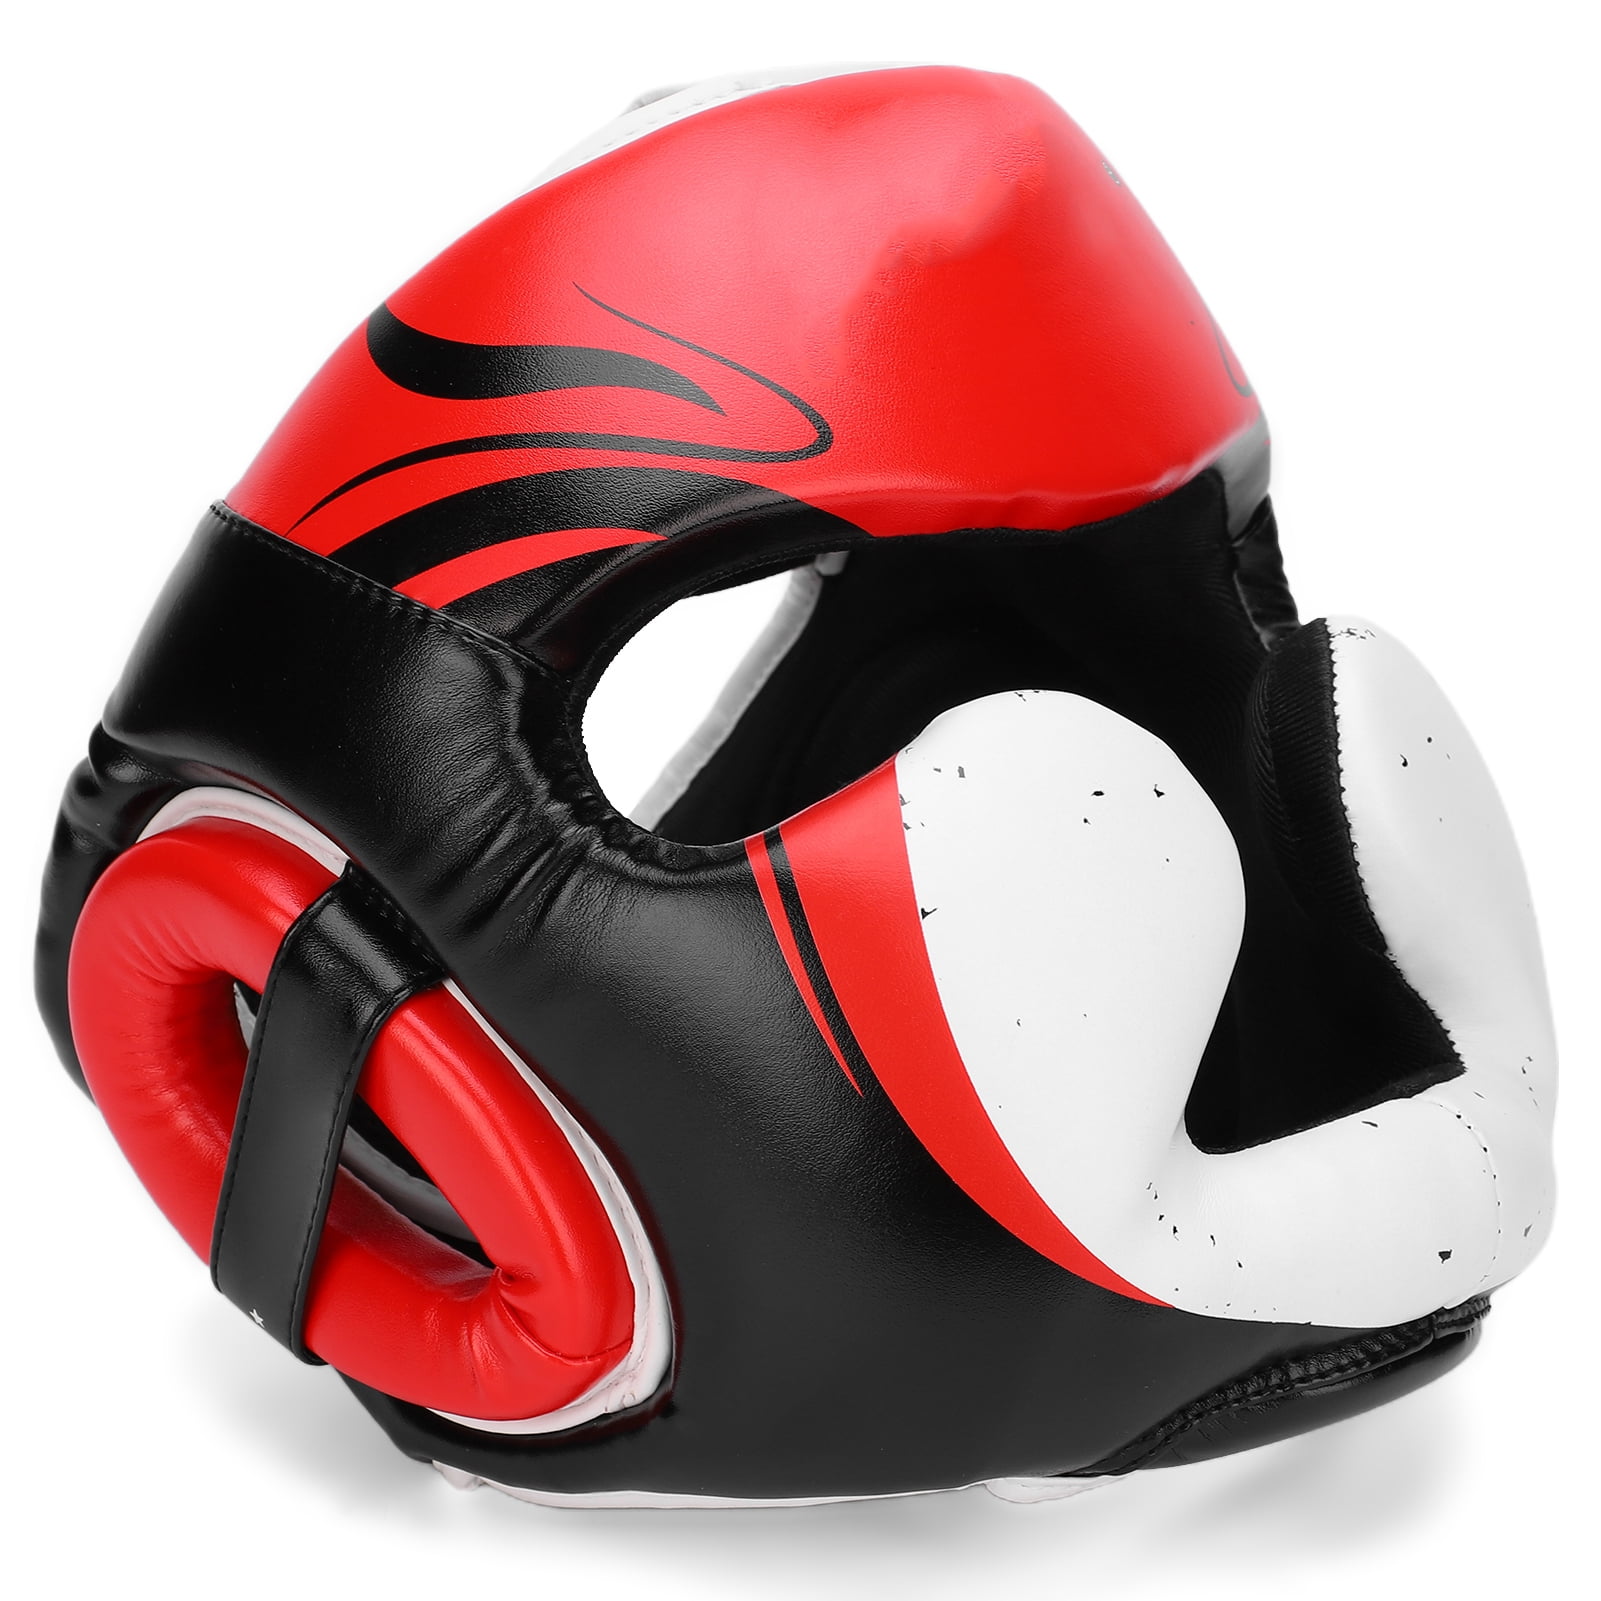 Details about   Sports Boxing Helmet Protective Gear For Mixed Martial Arts Muay Thai Red 